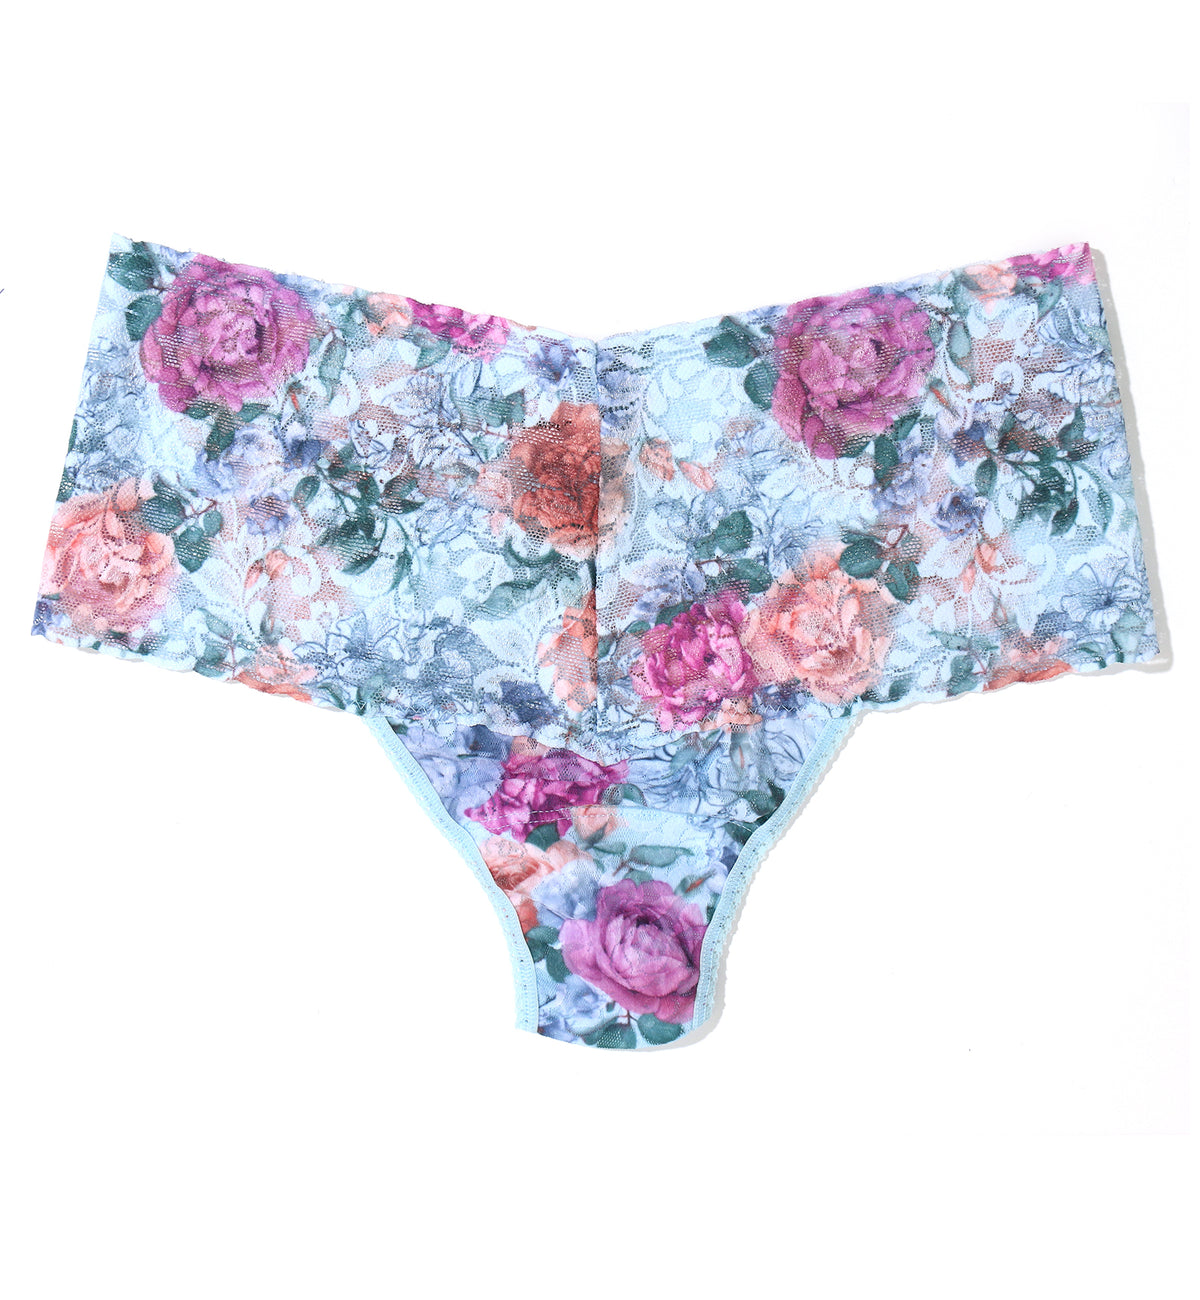 Hanky Panky Printed Retro Lace Thong (PR9K1926),Tea for Two - Tea for Two,One Size